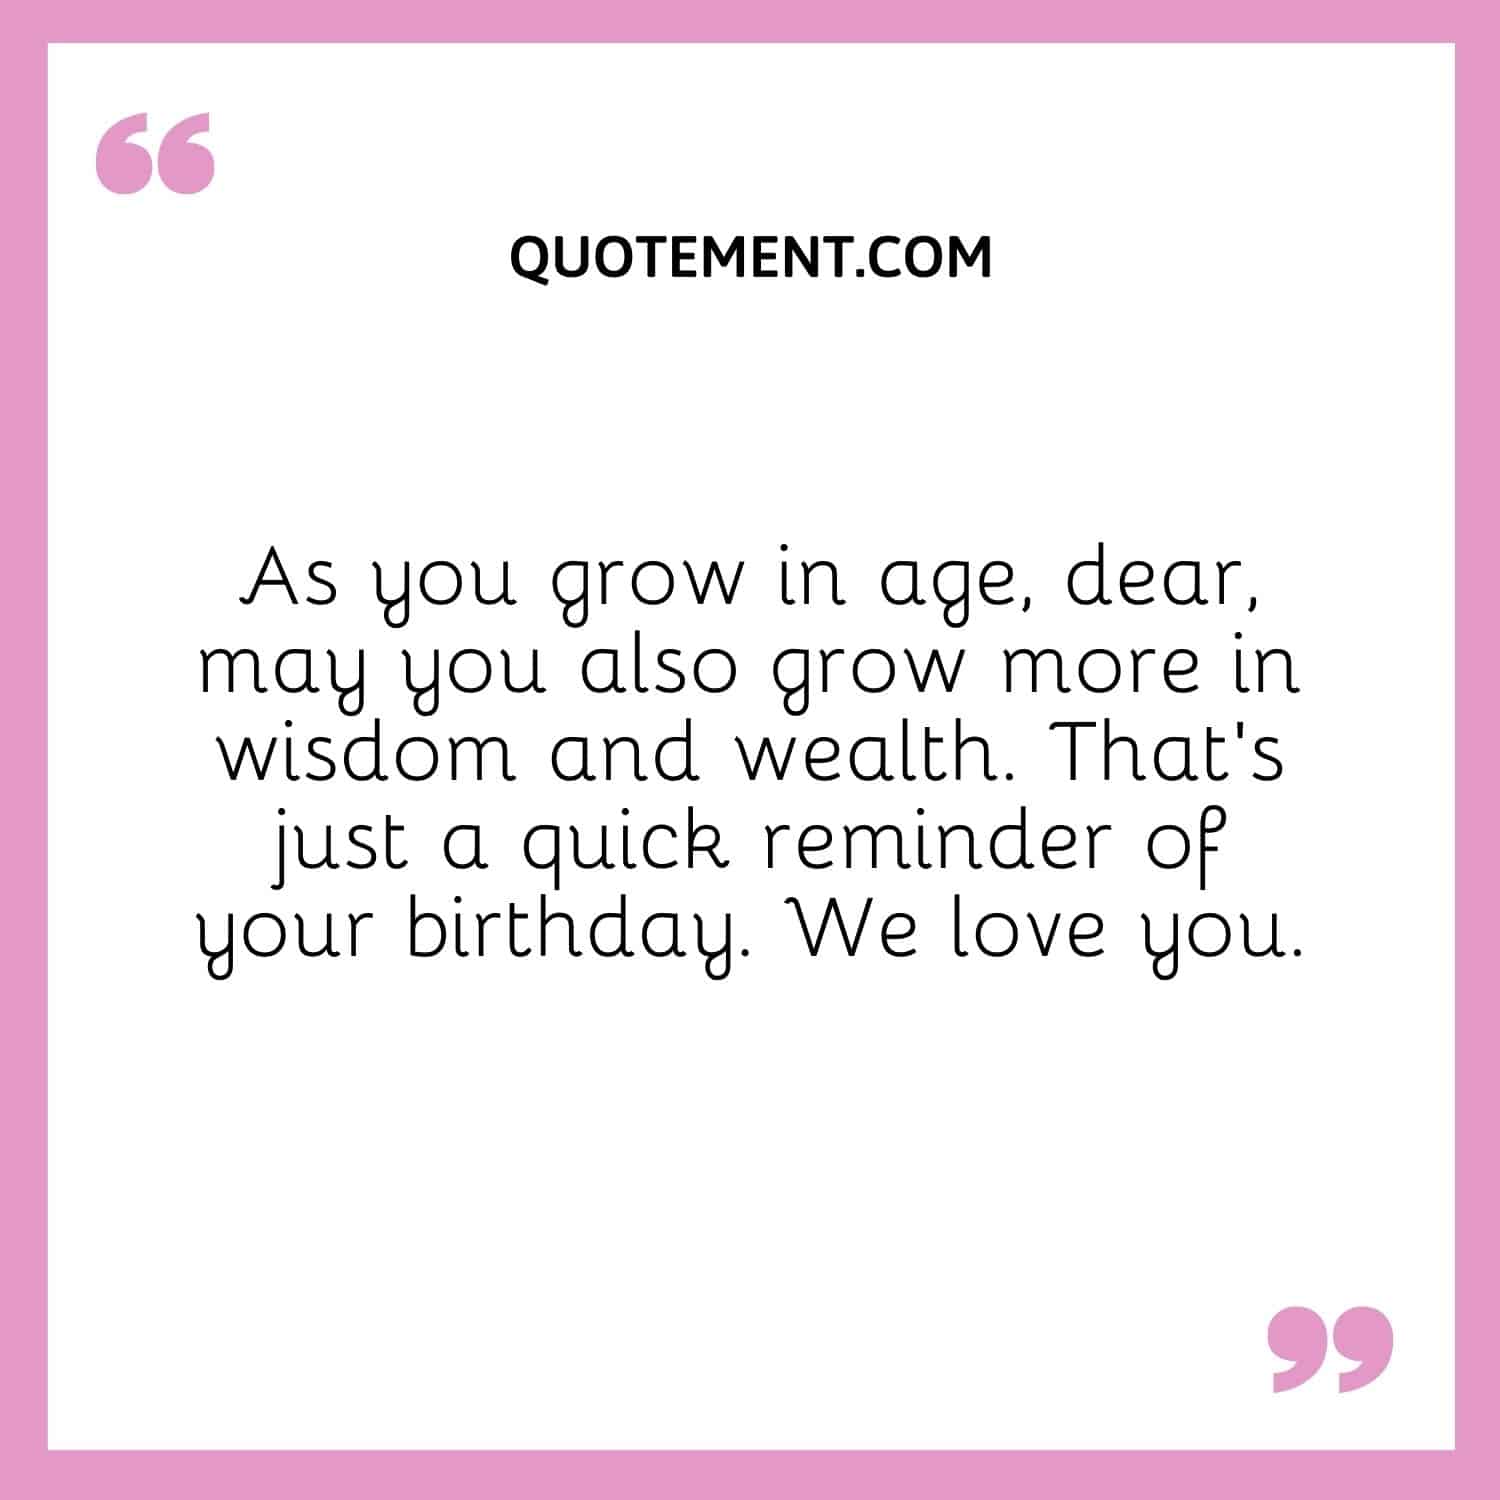 As you grow in age, dear, may you also grow more in wisdom and wealth.